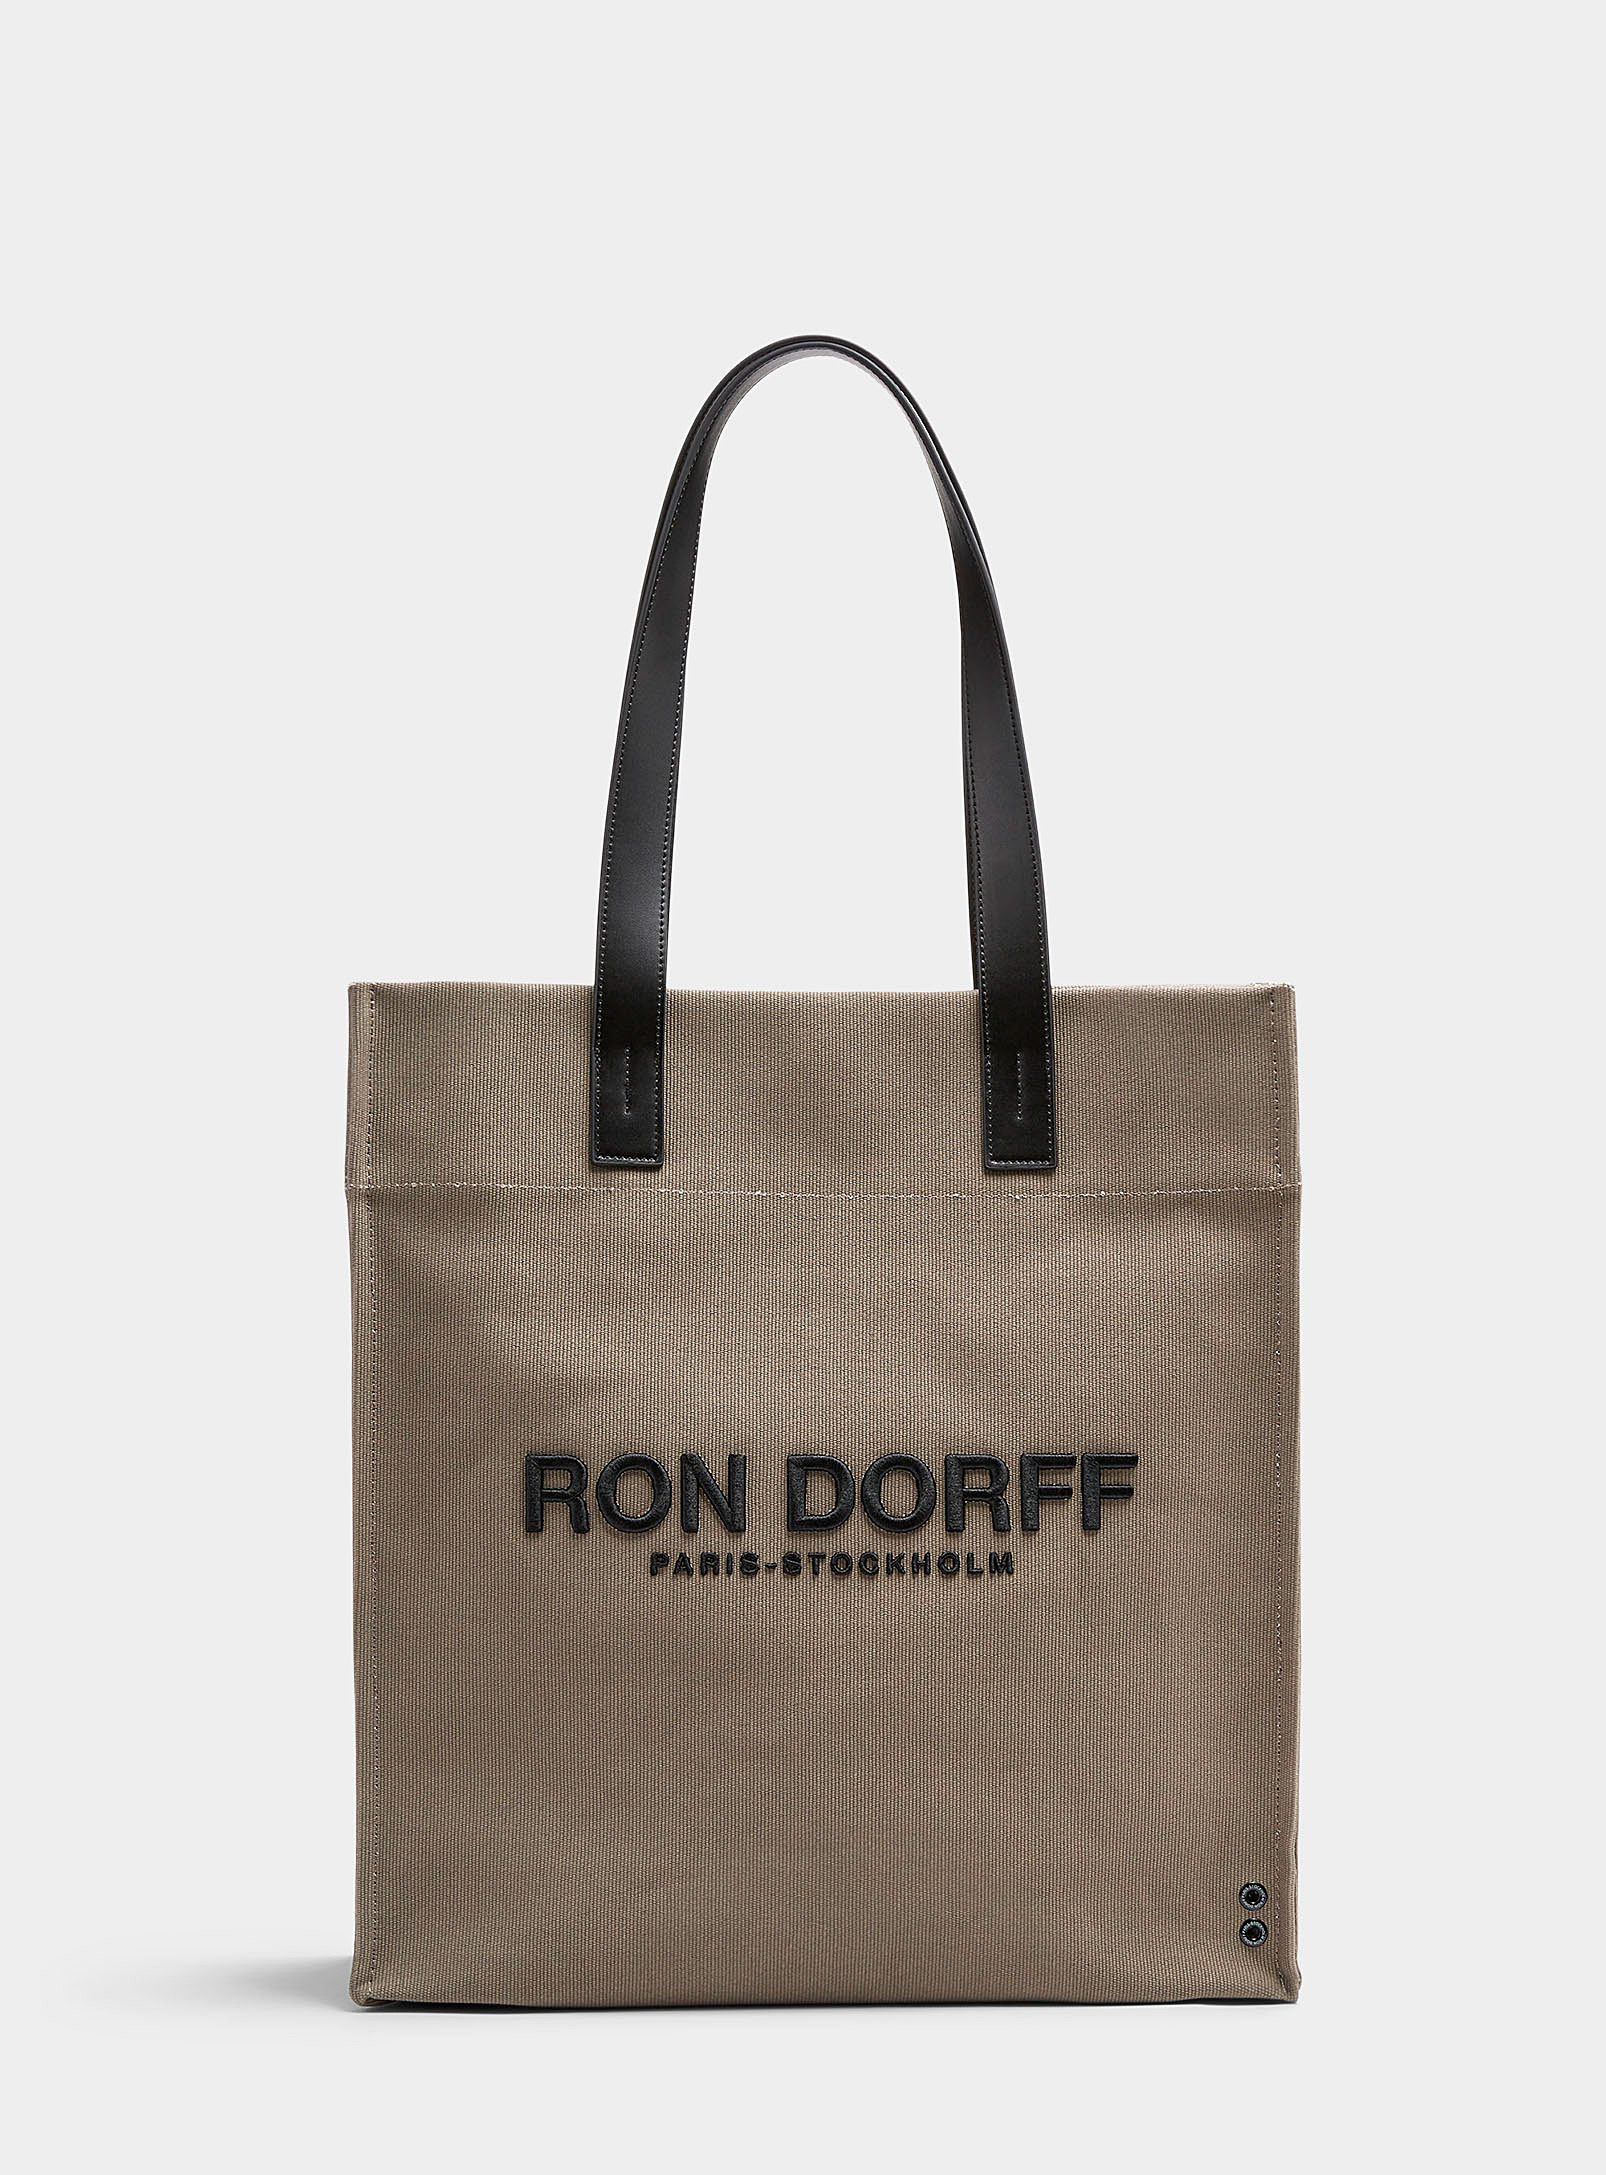 Ron Dorff City Tote Bag In Mossy Green